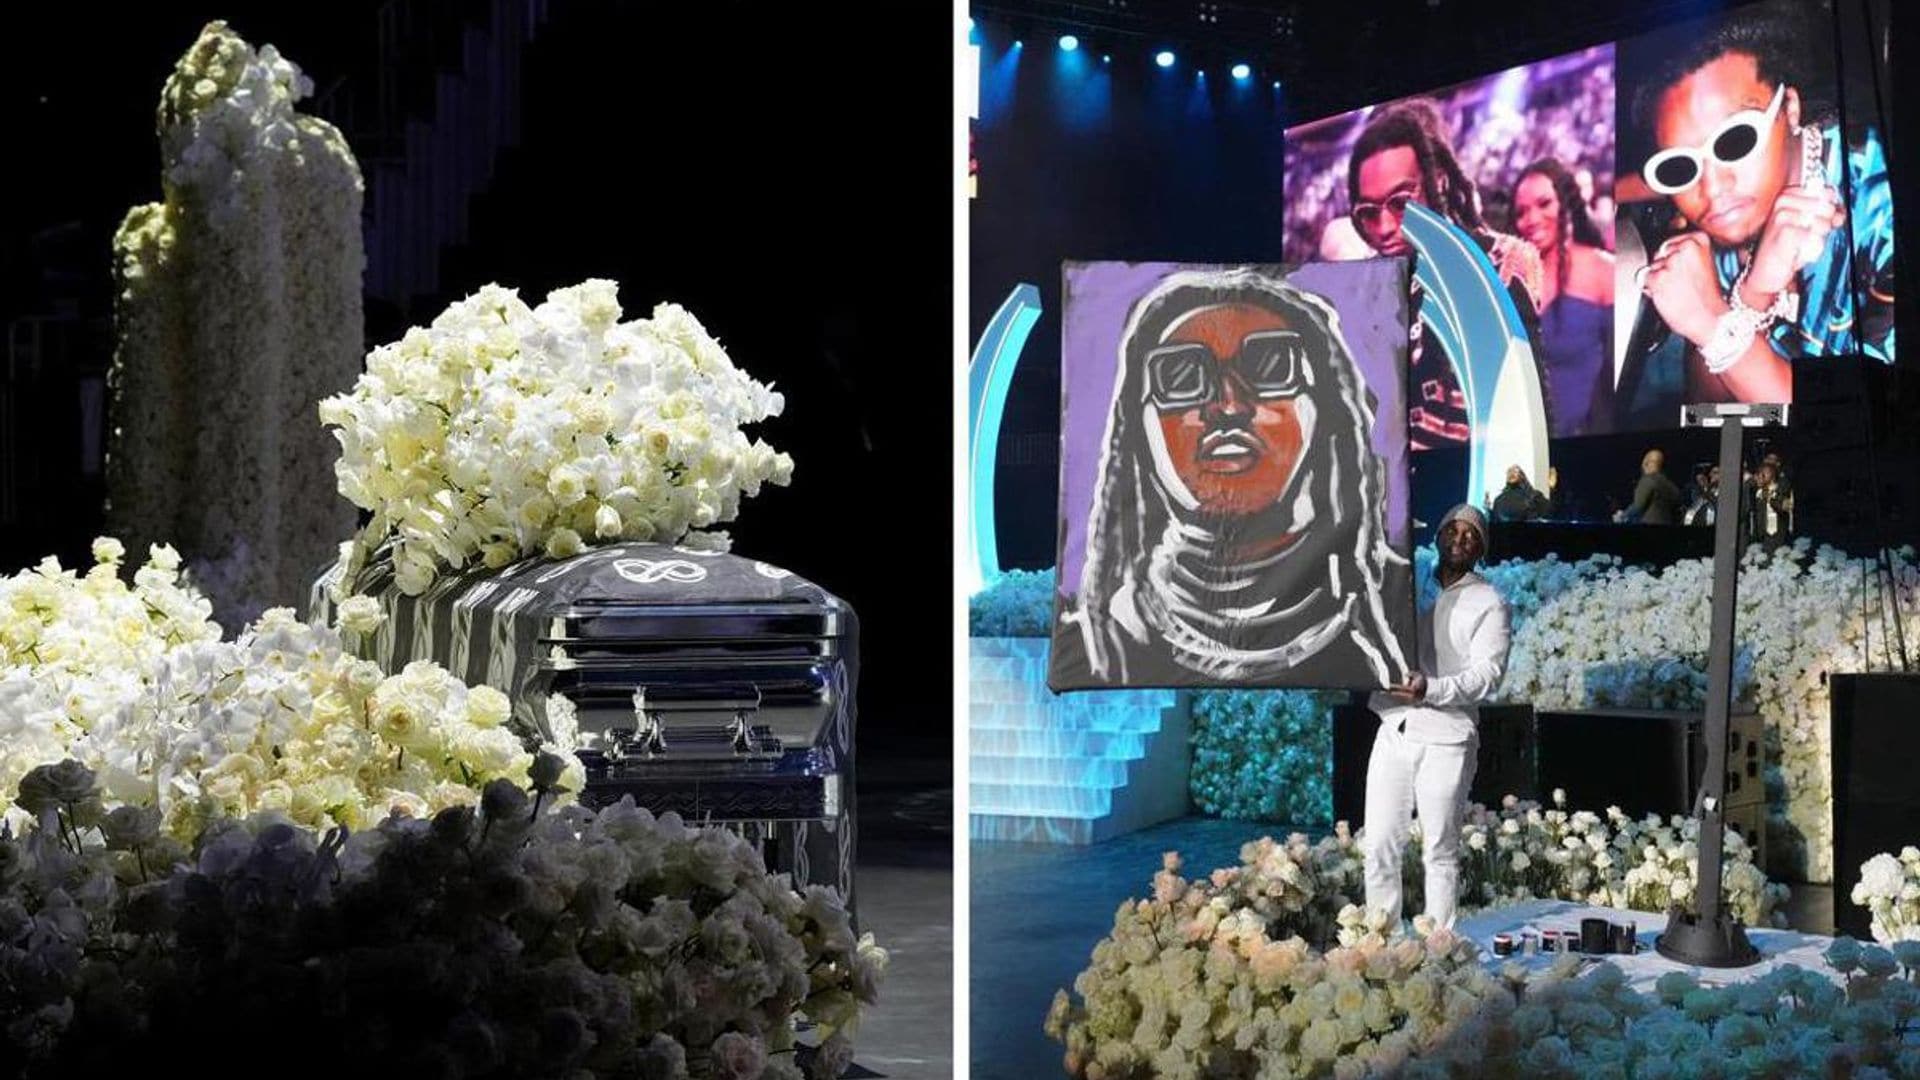 Takeoff’s funeral: Cardi B, Offset, Quavo, Justin Bieber, and more gathered to pay tribute to the late rapper